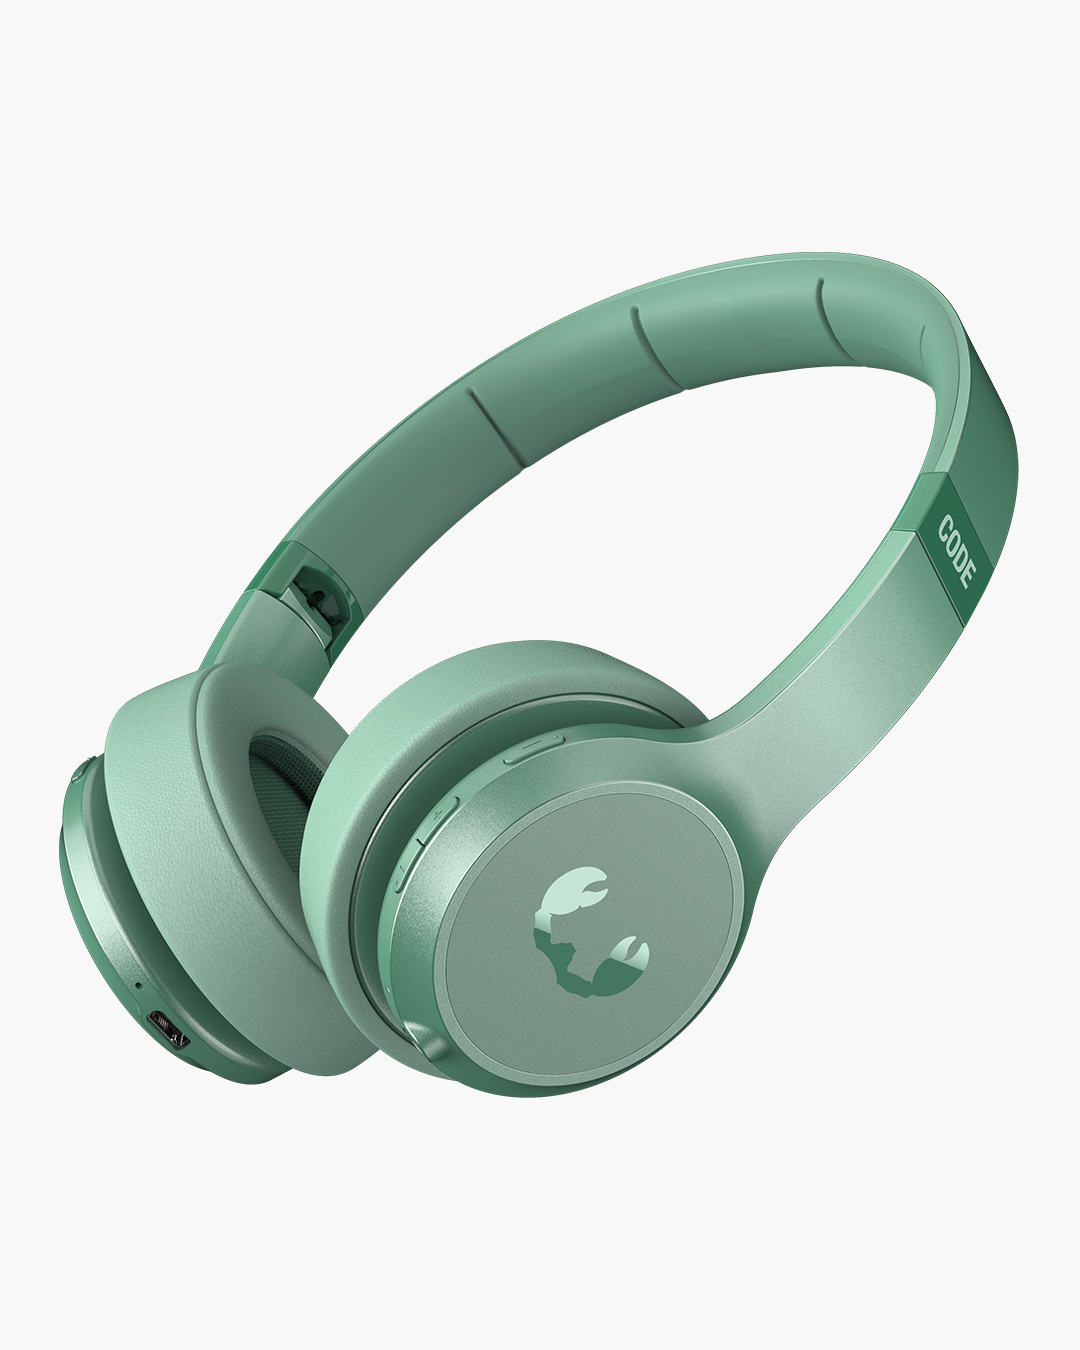 Fresh 'n Rebel - Code ANC - Wireless on-ear headphones with active noise cancelling - Misty Mint